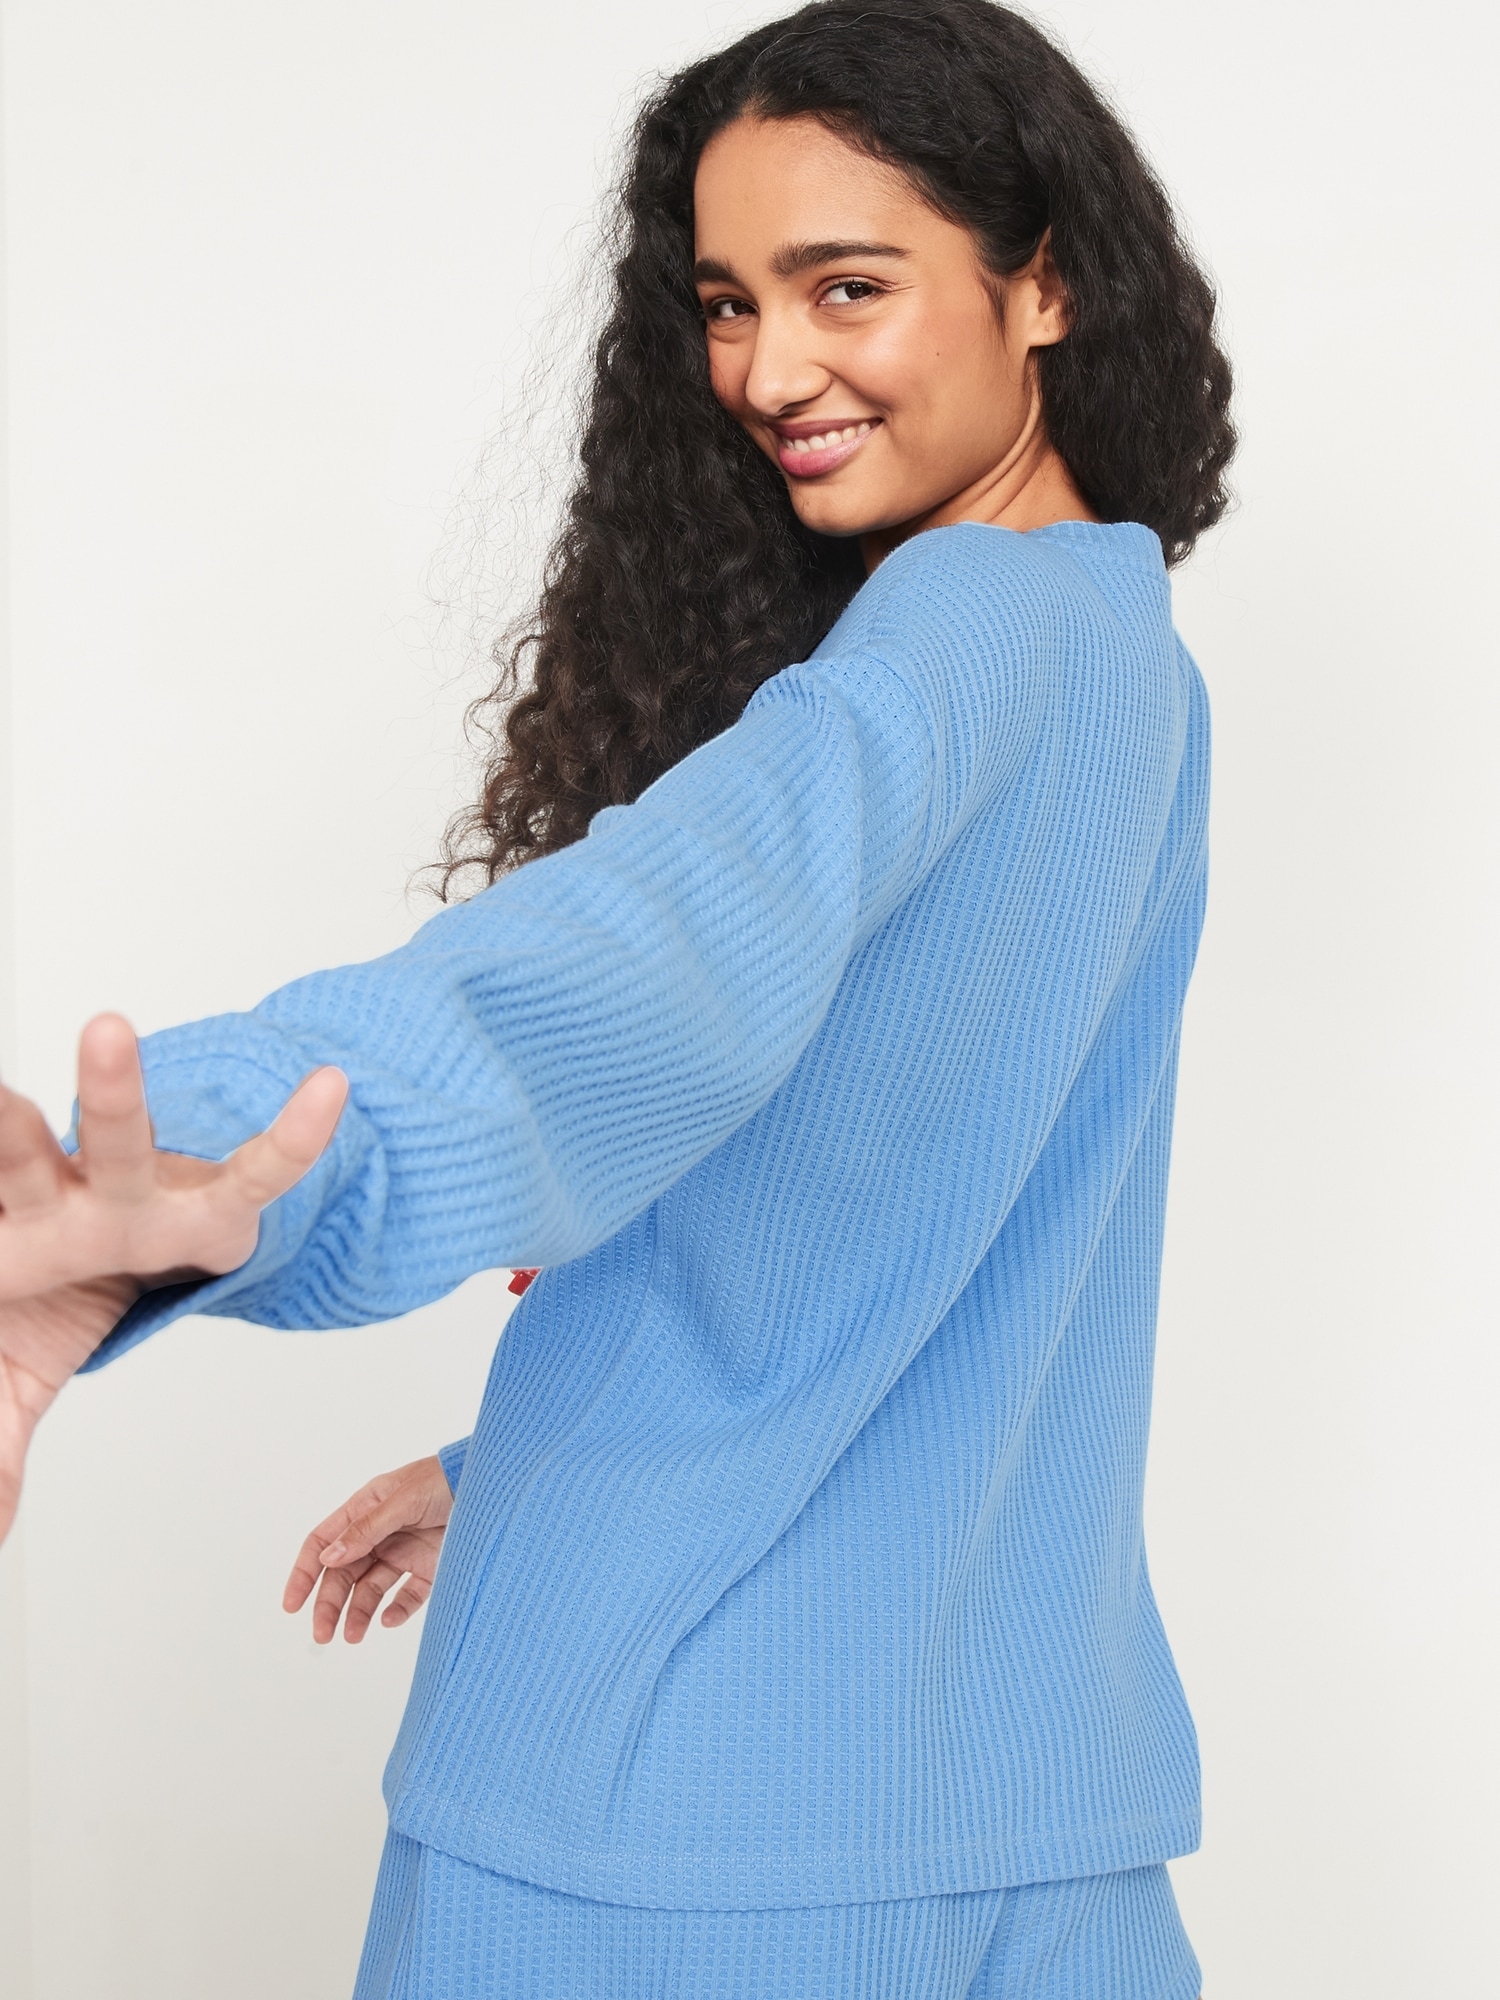 Thermal Henley Pajama Tunic Top for Women | Old Navy